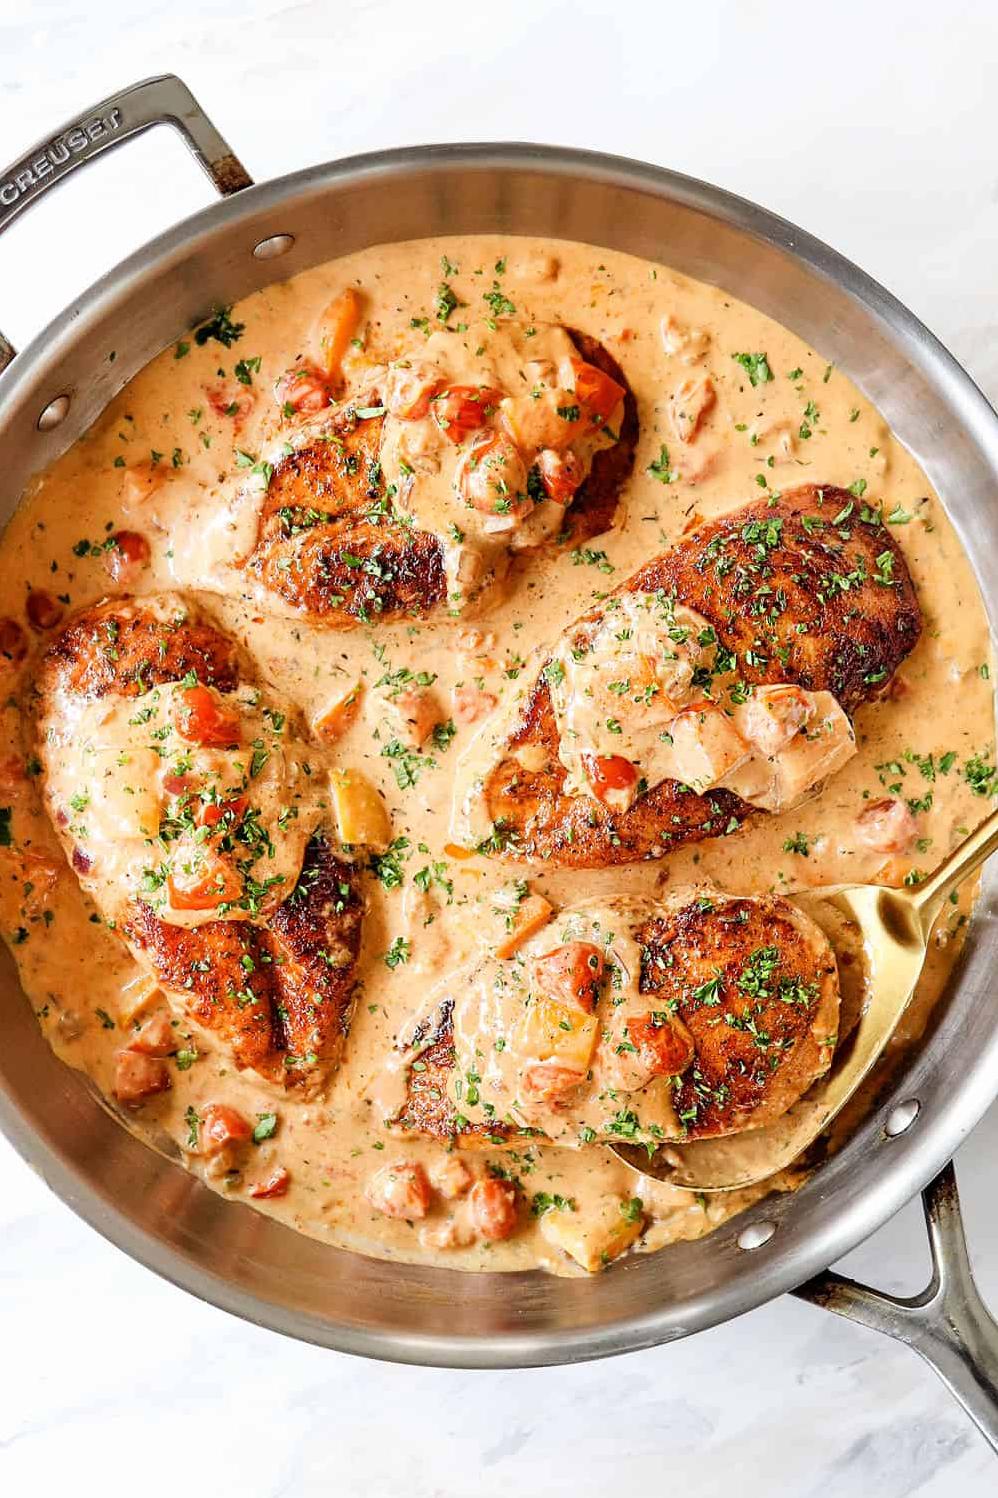  This Southern-inspired chicken bake has a little something for everyone.